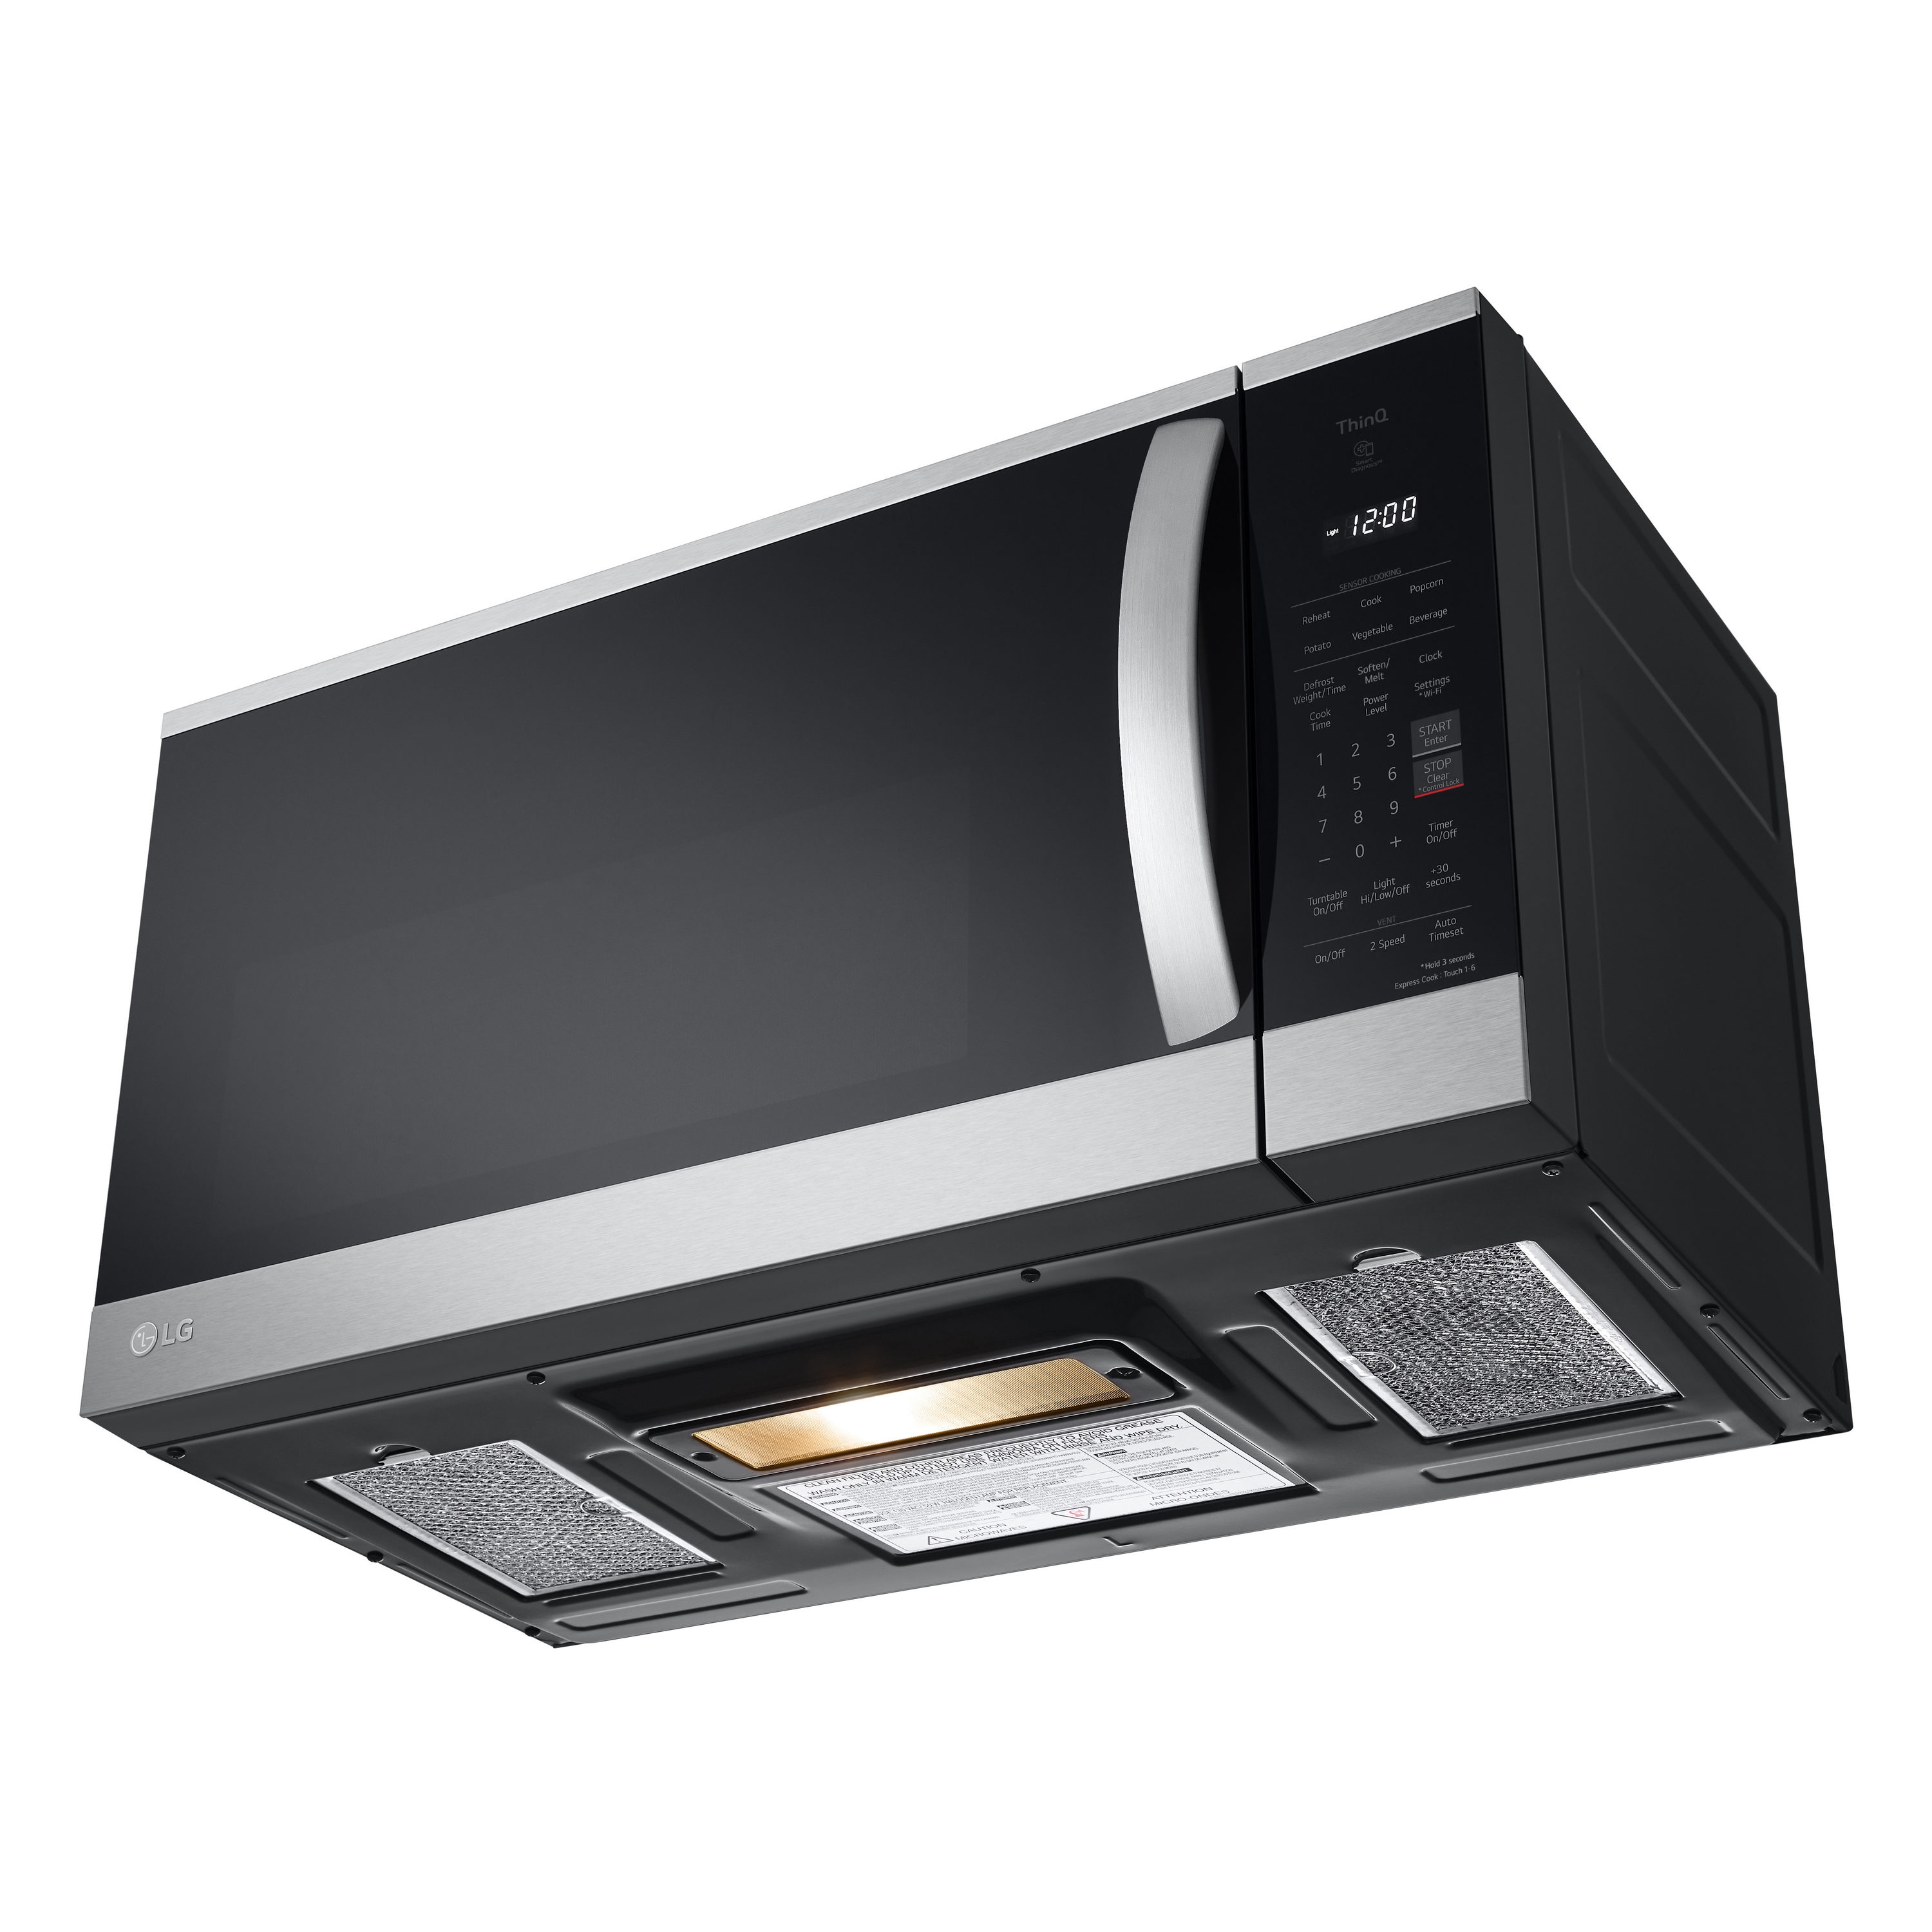 department Smart 1000-Watt LG Over-the-Range Steel) Microwaves Cooking Over-the-Range (Printproof at Microwave in with the Sensor 1.8-cu Stainless ft